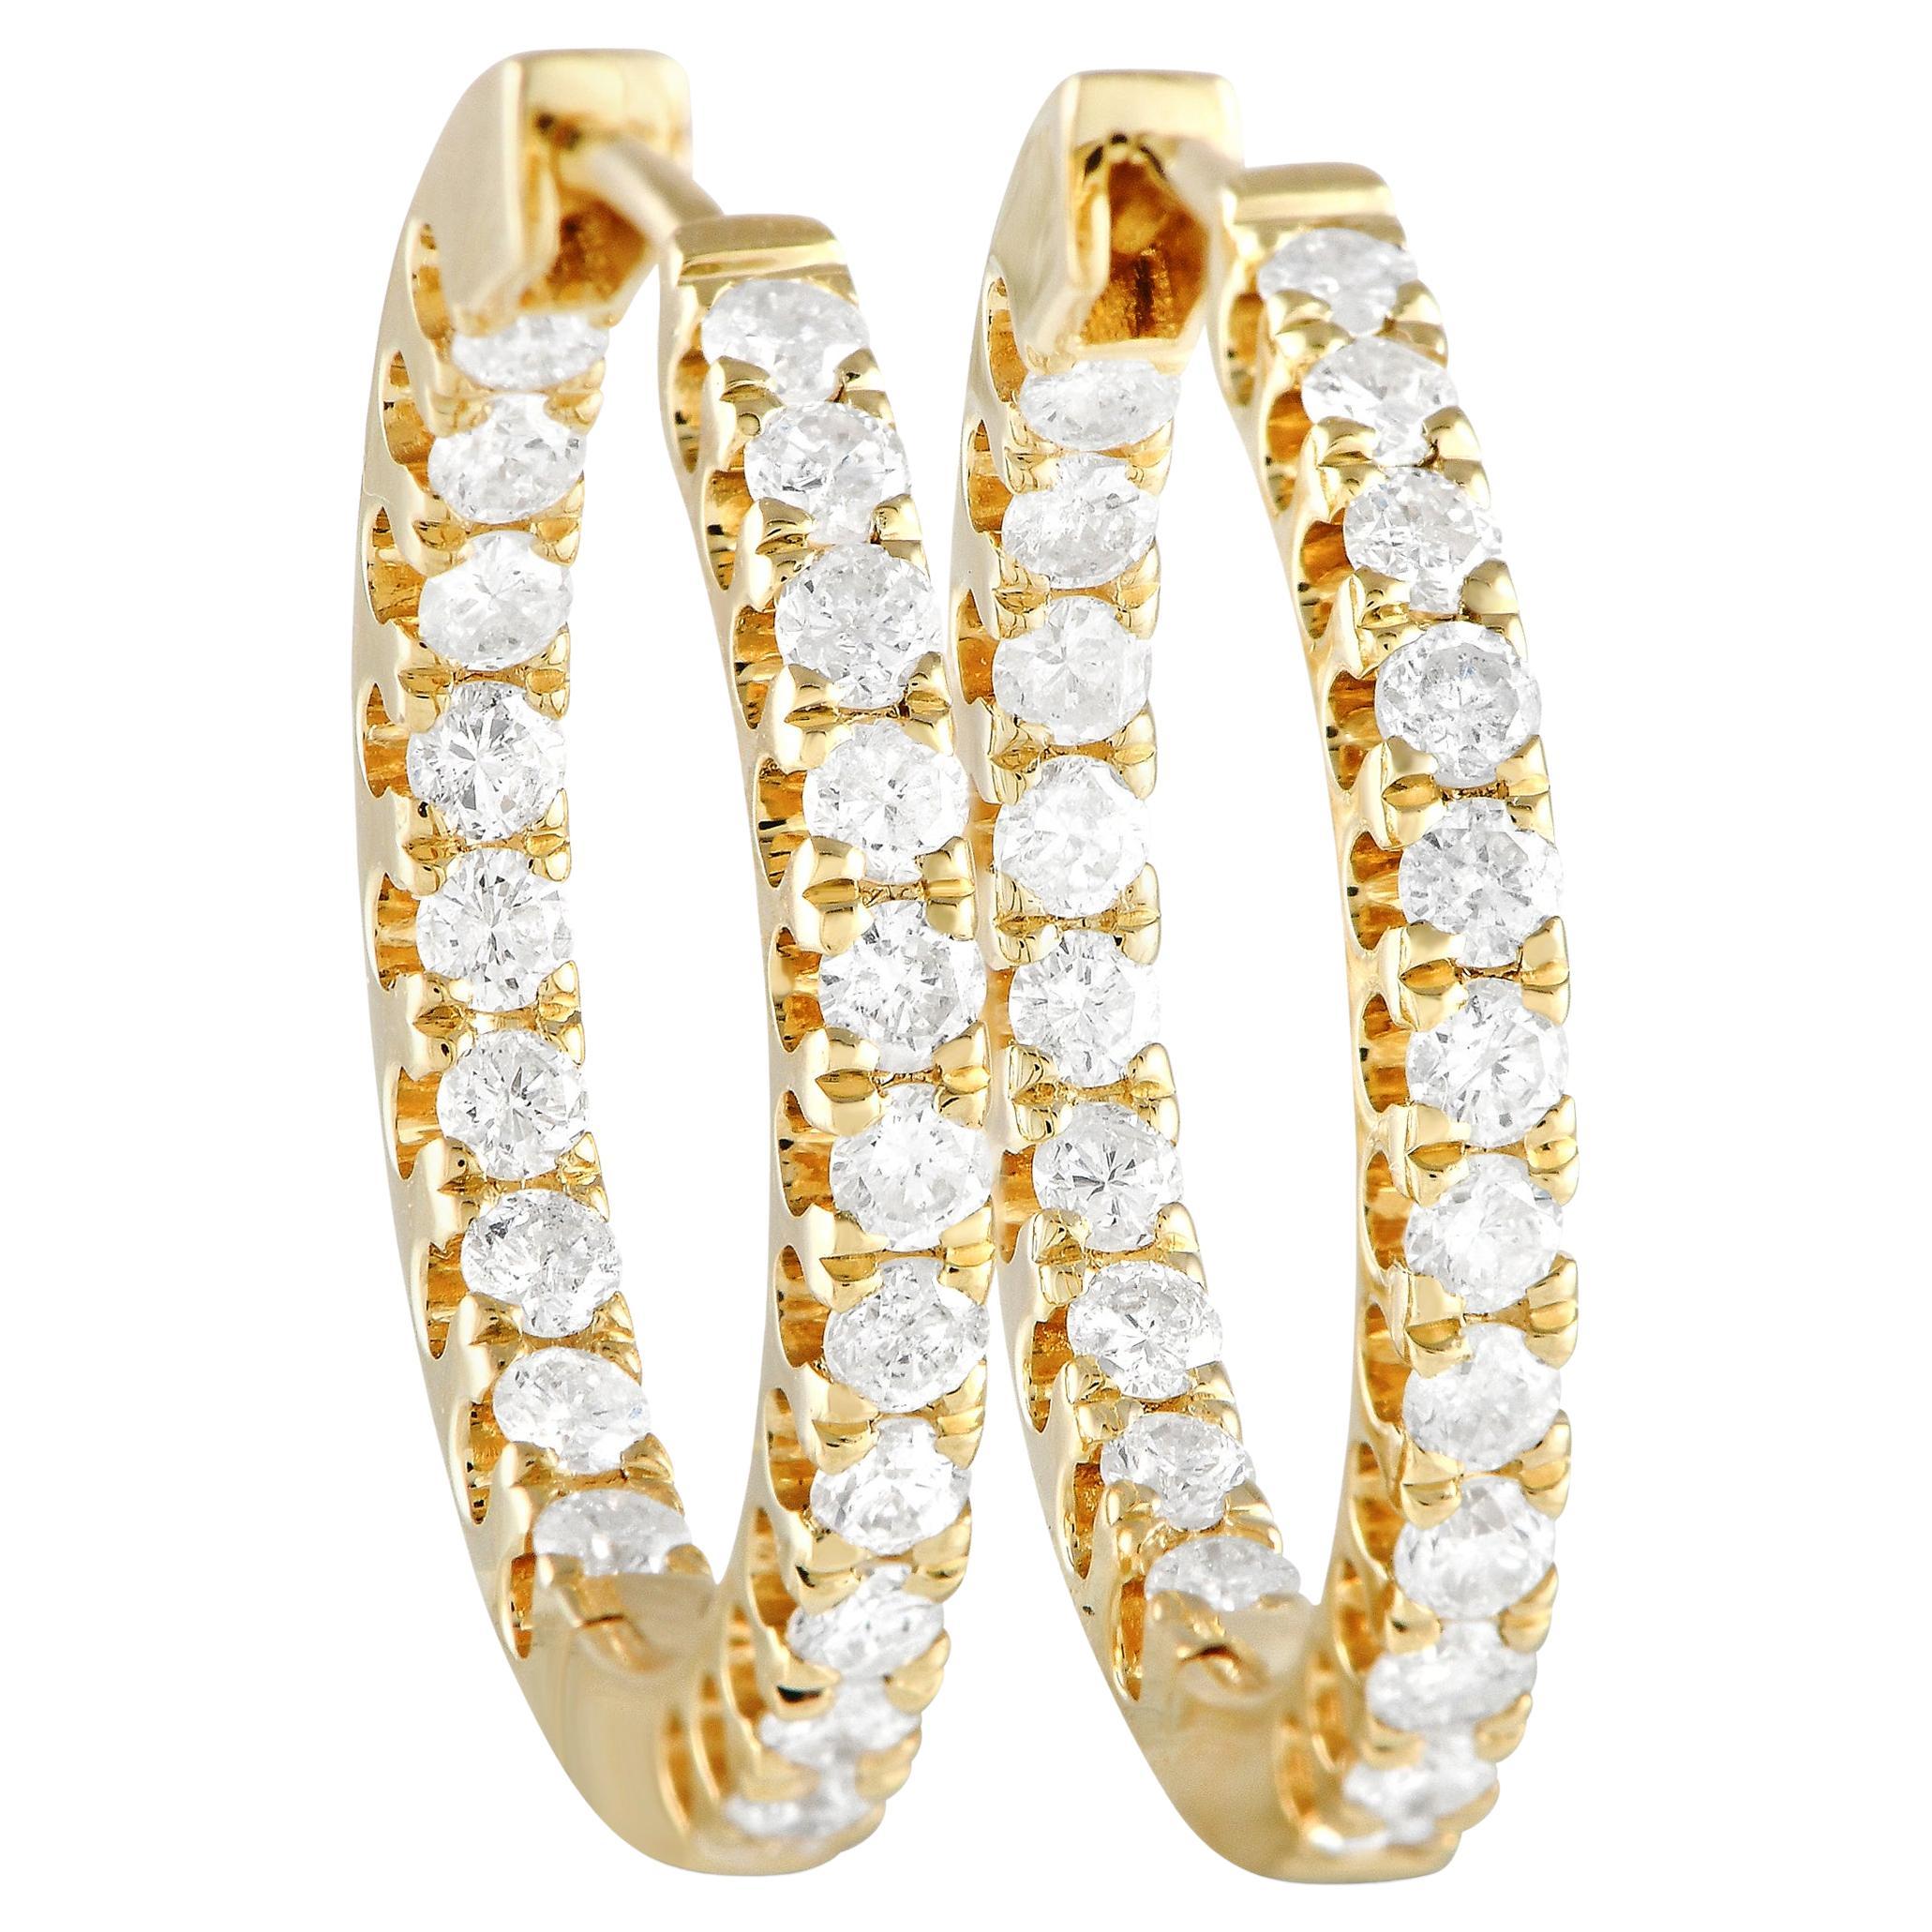 Lb Exclusive 14k Yellow Gold 1.0 Carat Diamond Inside-Out Hoop Earrings For Sale